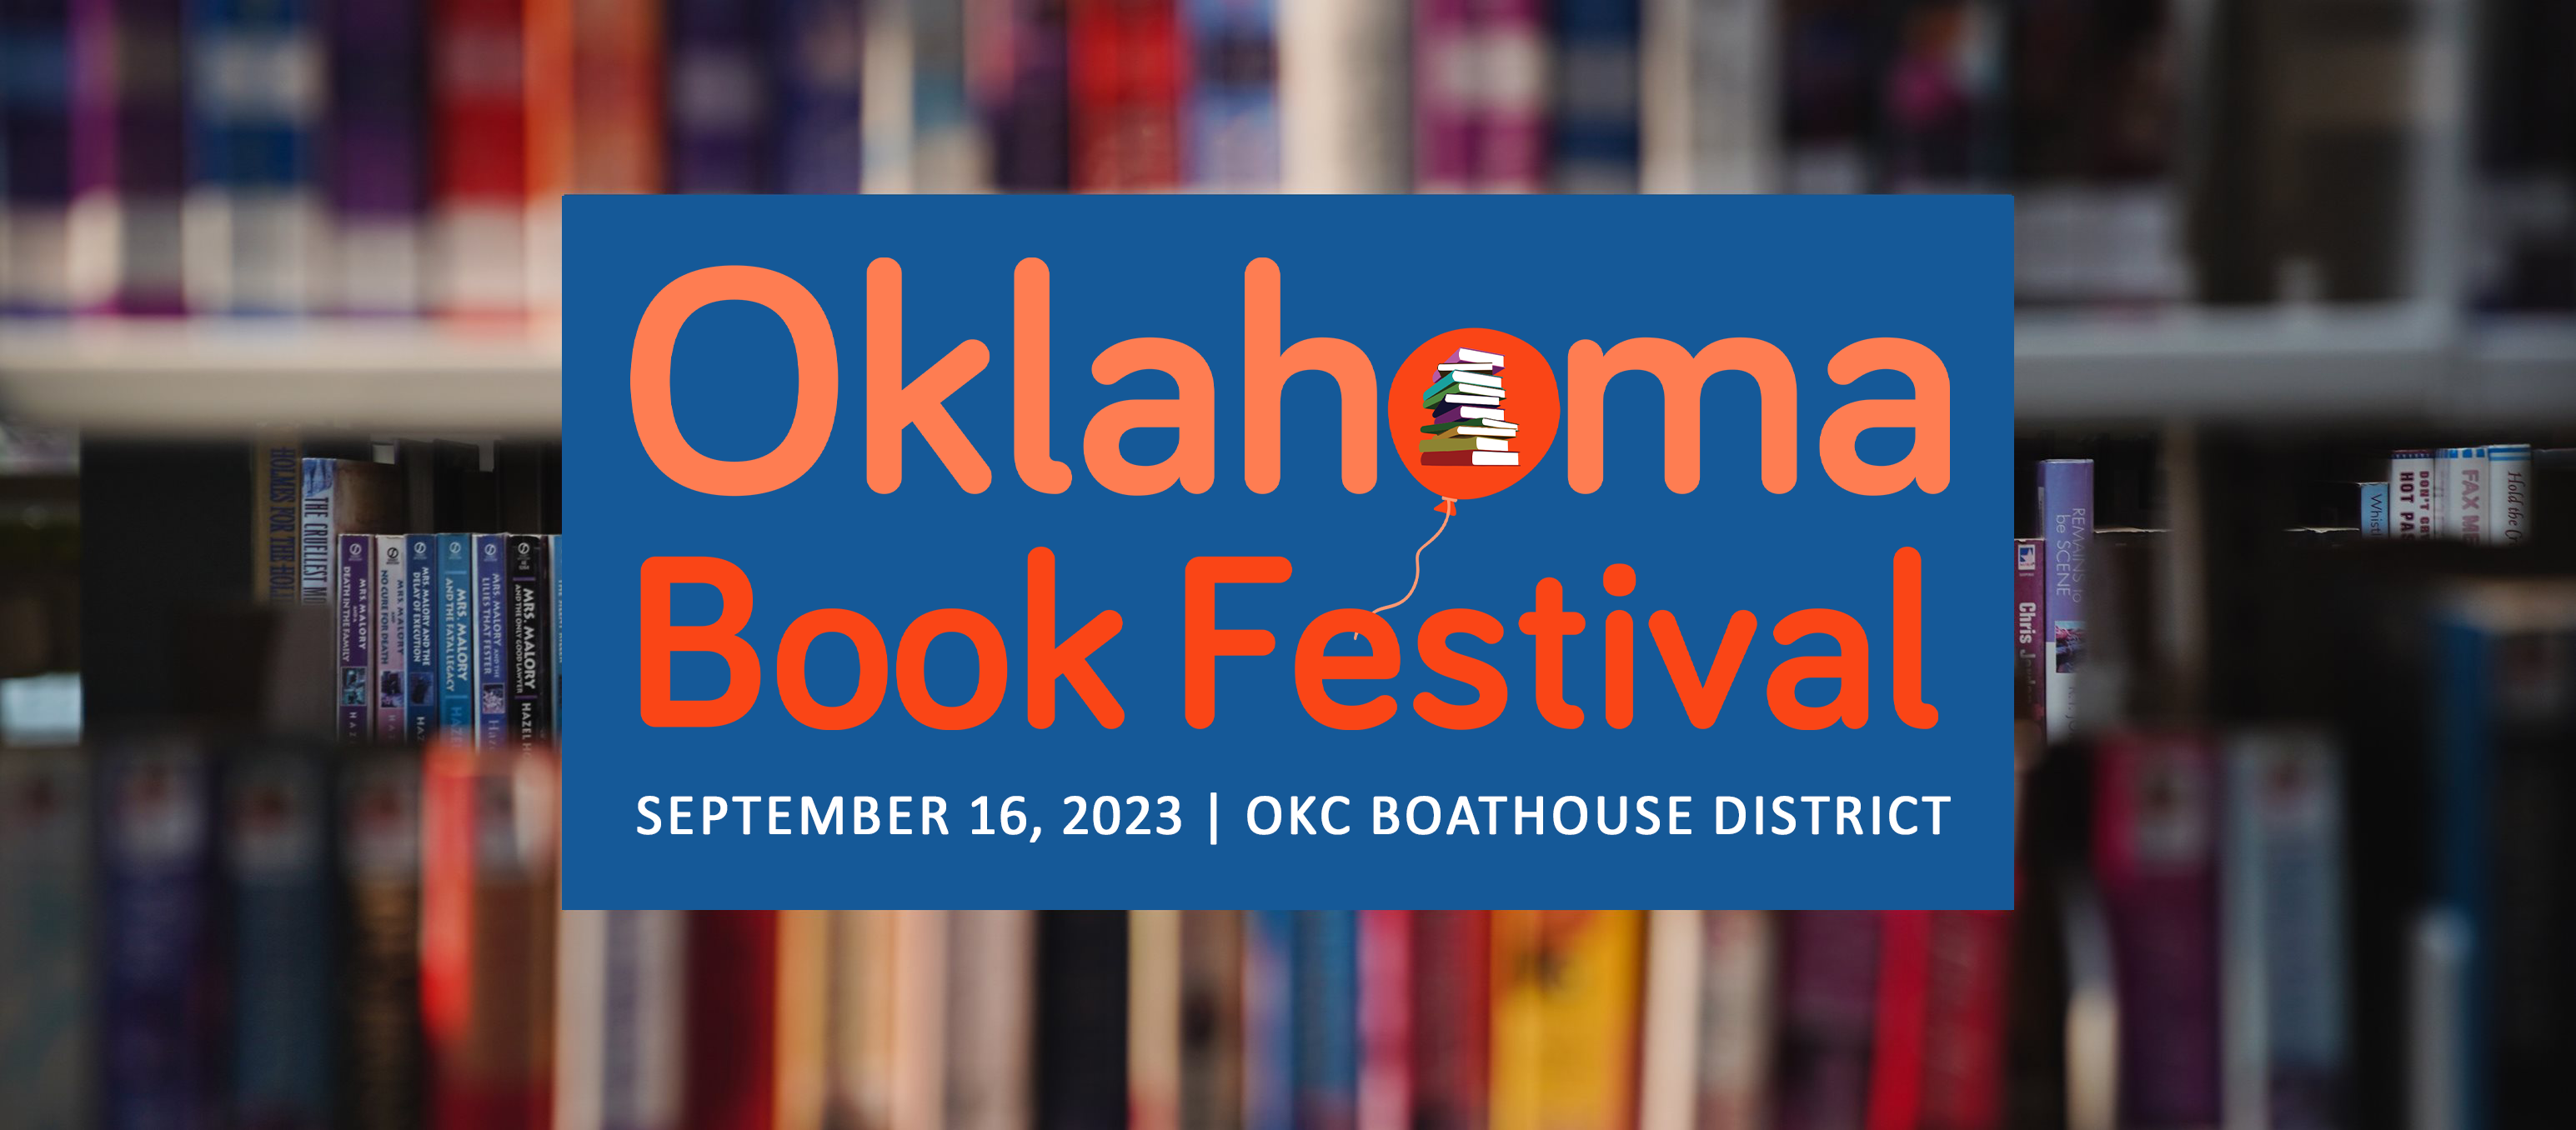 Oklahoma Book Festival will be September 16, 2023 at the OKC Boathouse District